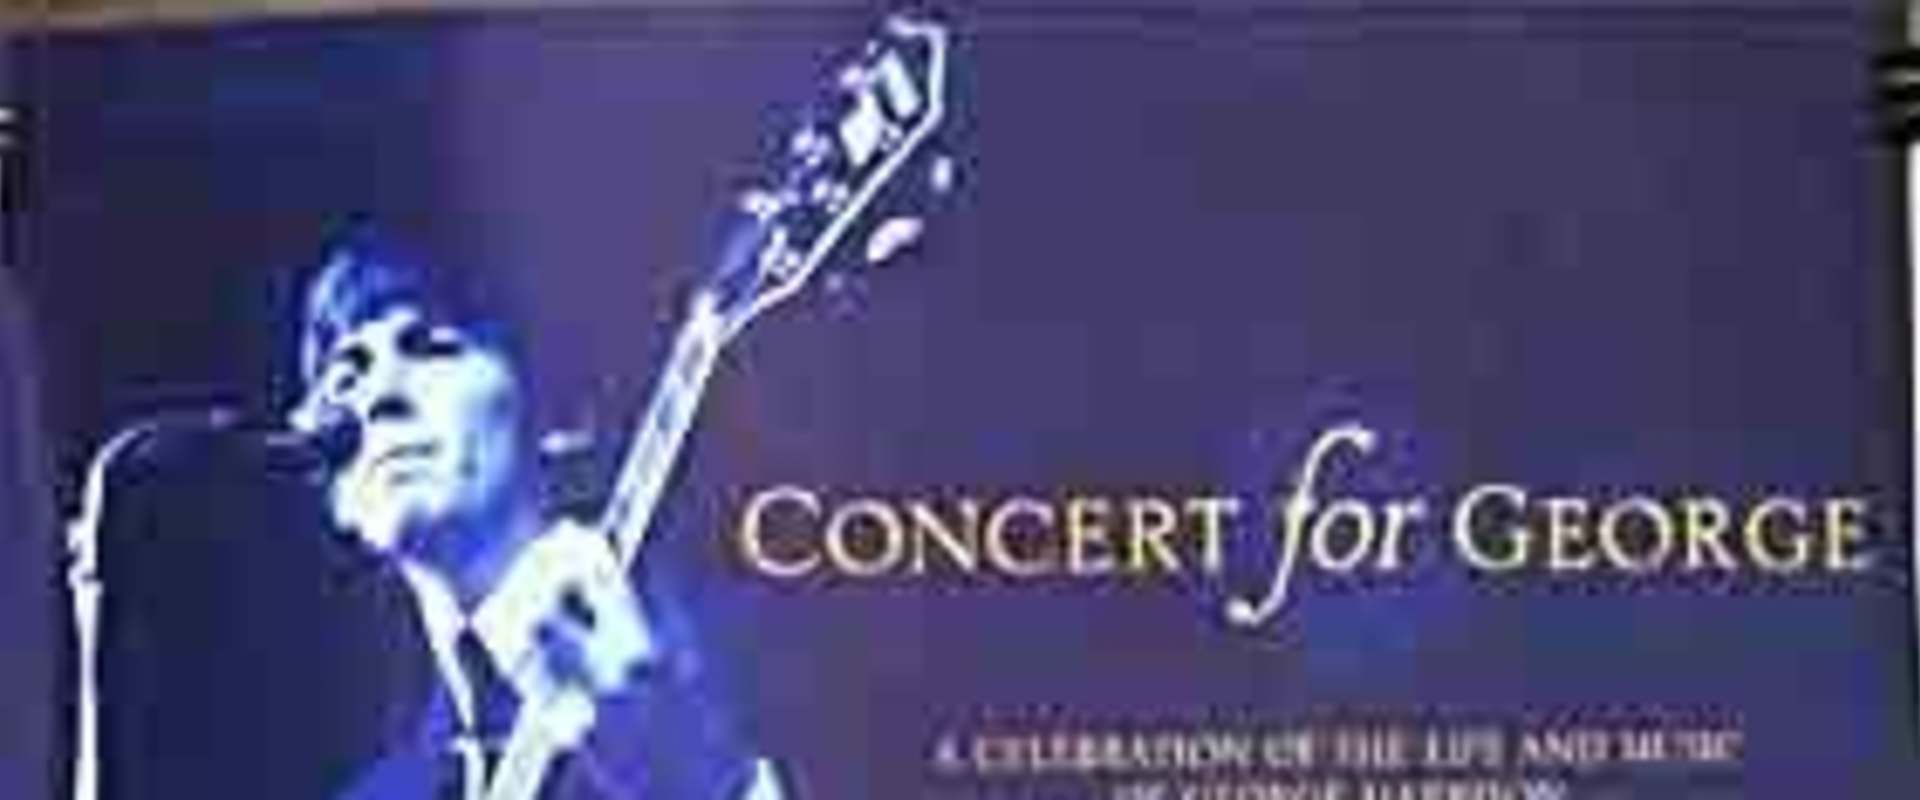 Concert for George background 1